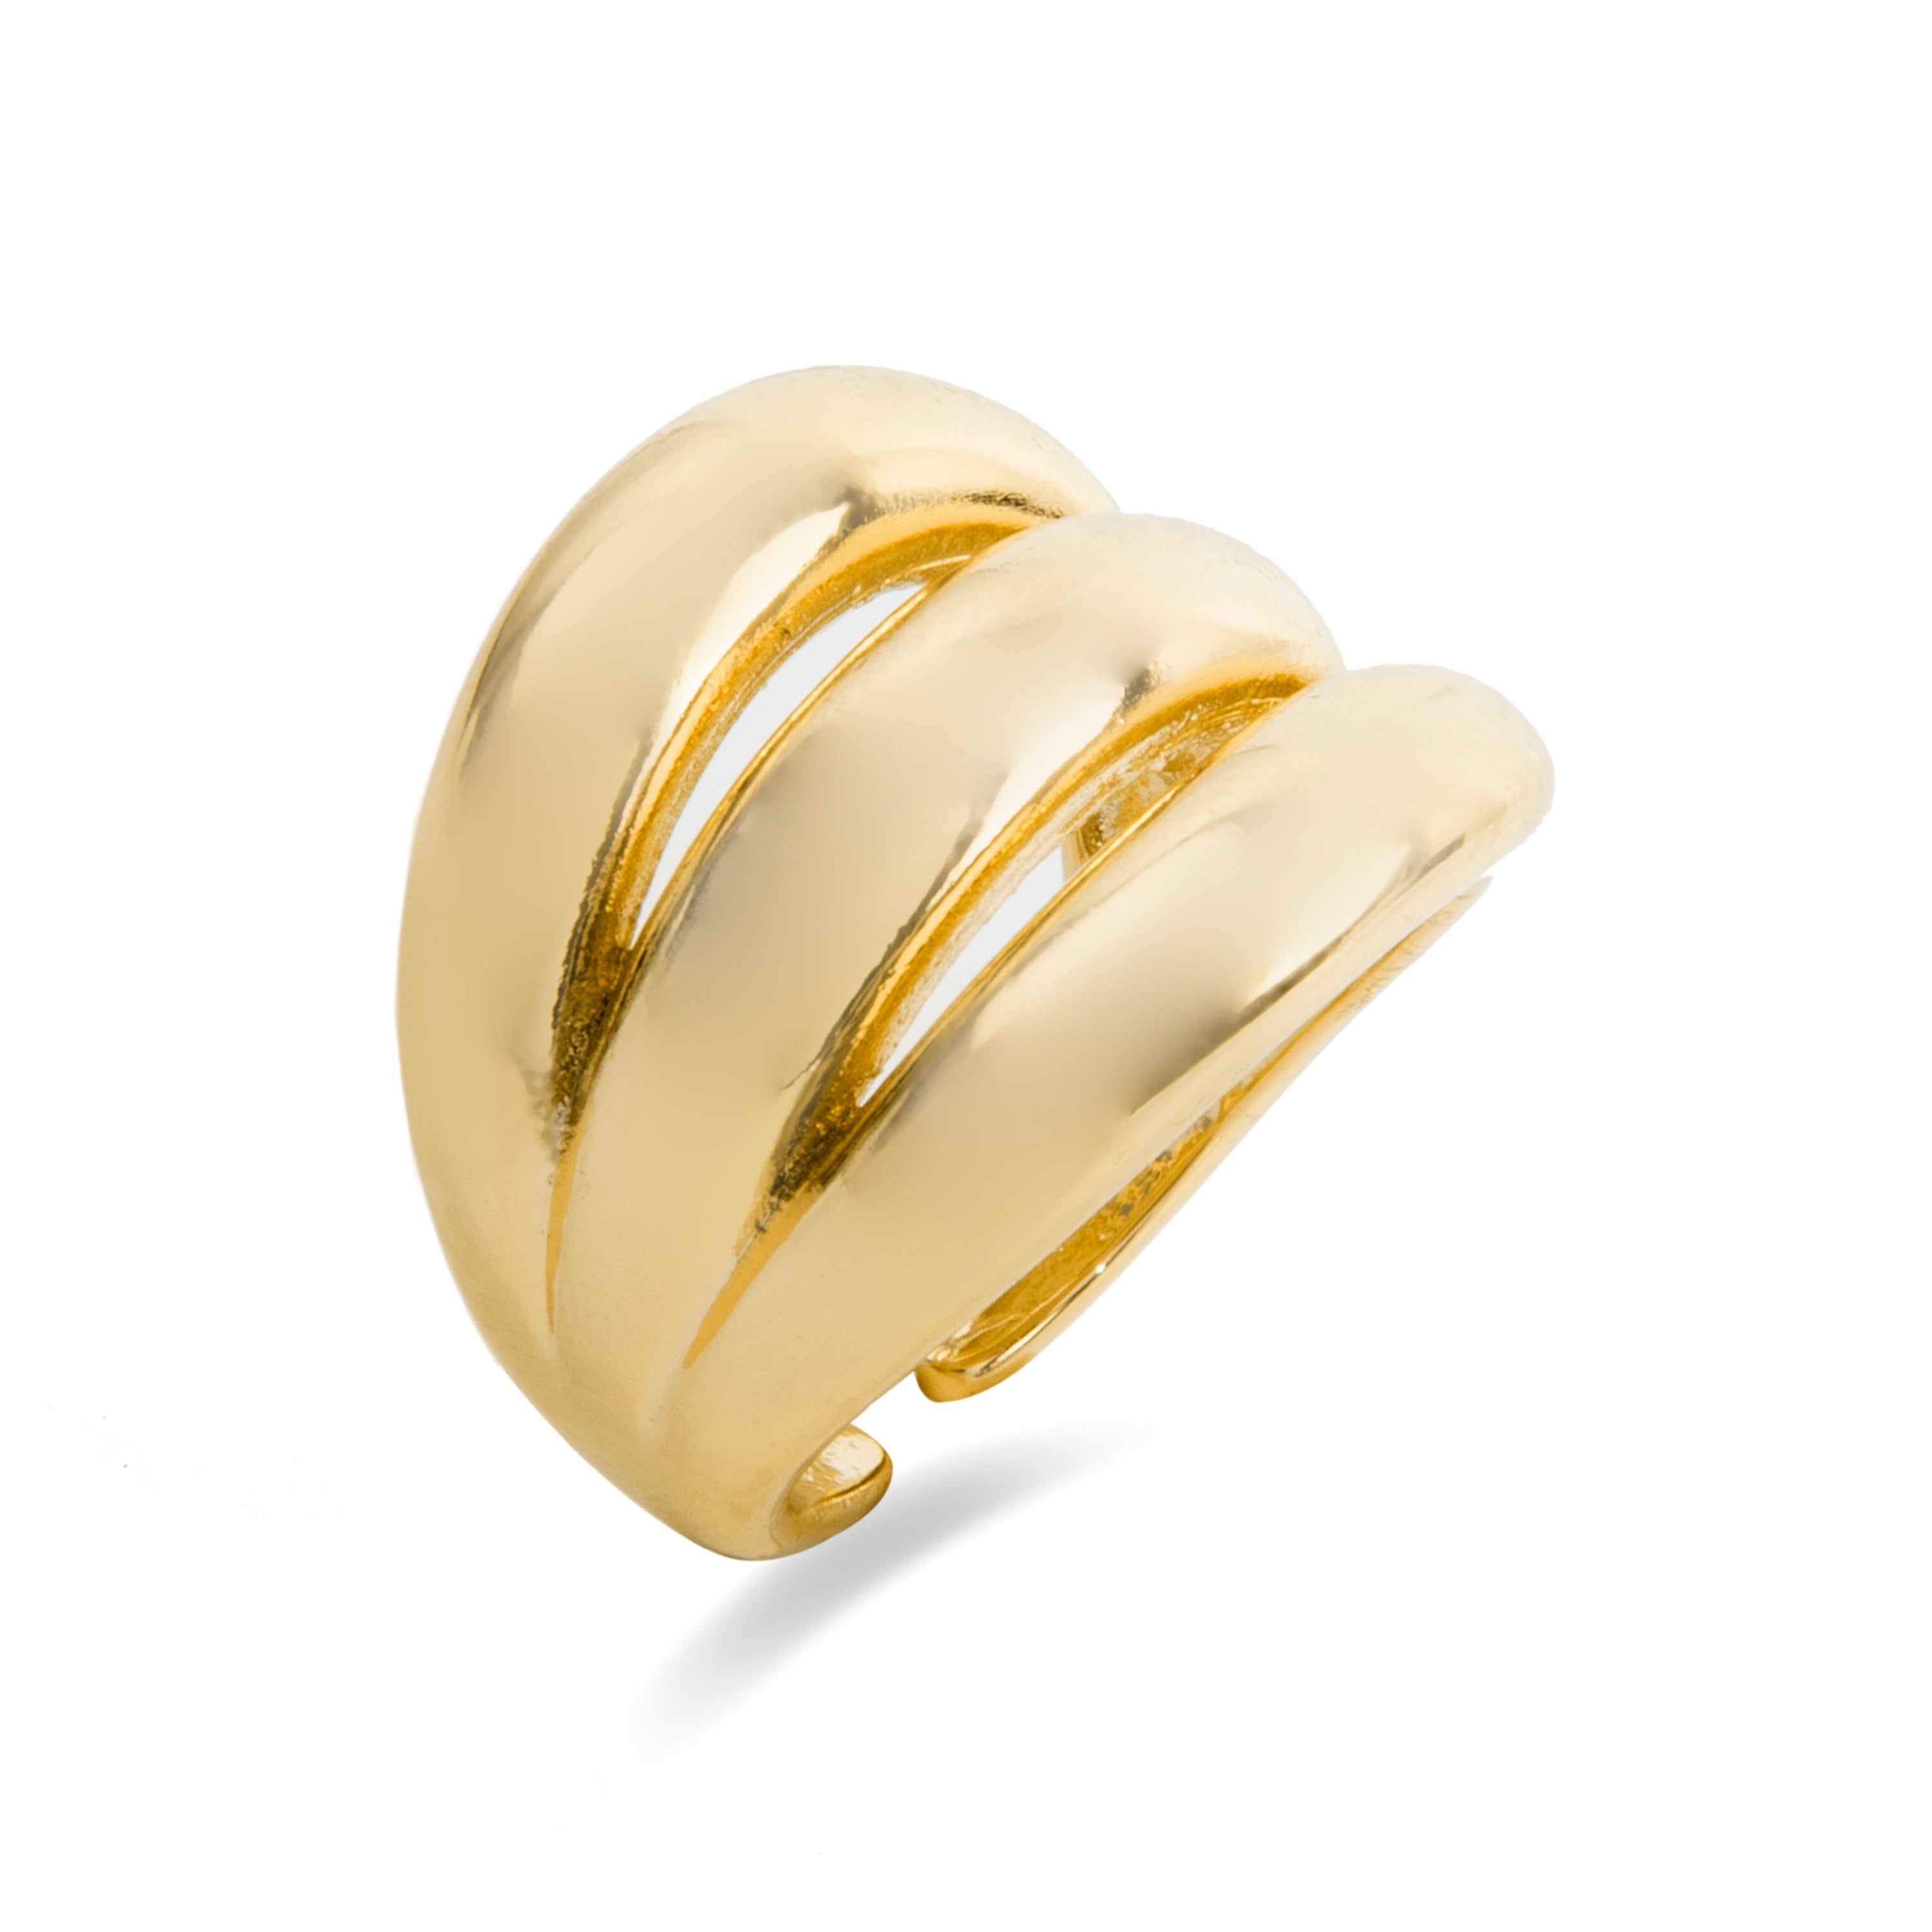 Ulayu ring finished in 18k yellow gold